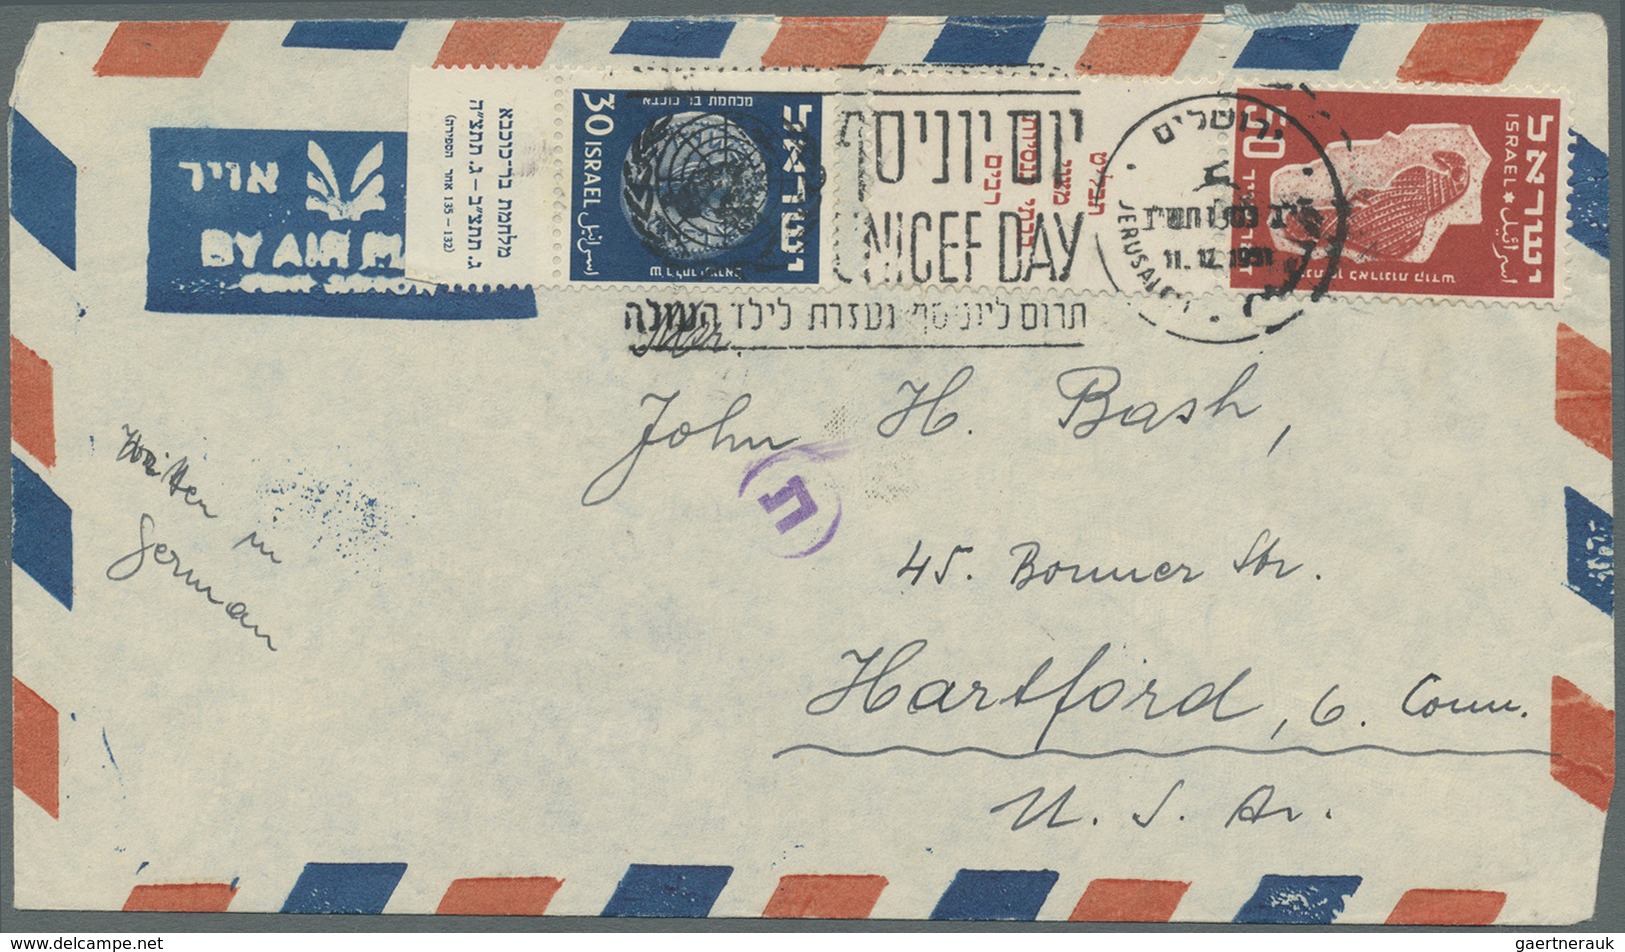 GA/Br Israel: 1948/1970 mostly, nice lot of 170 mainly better items including nice frankings with early ta